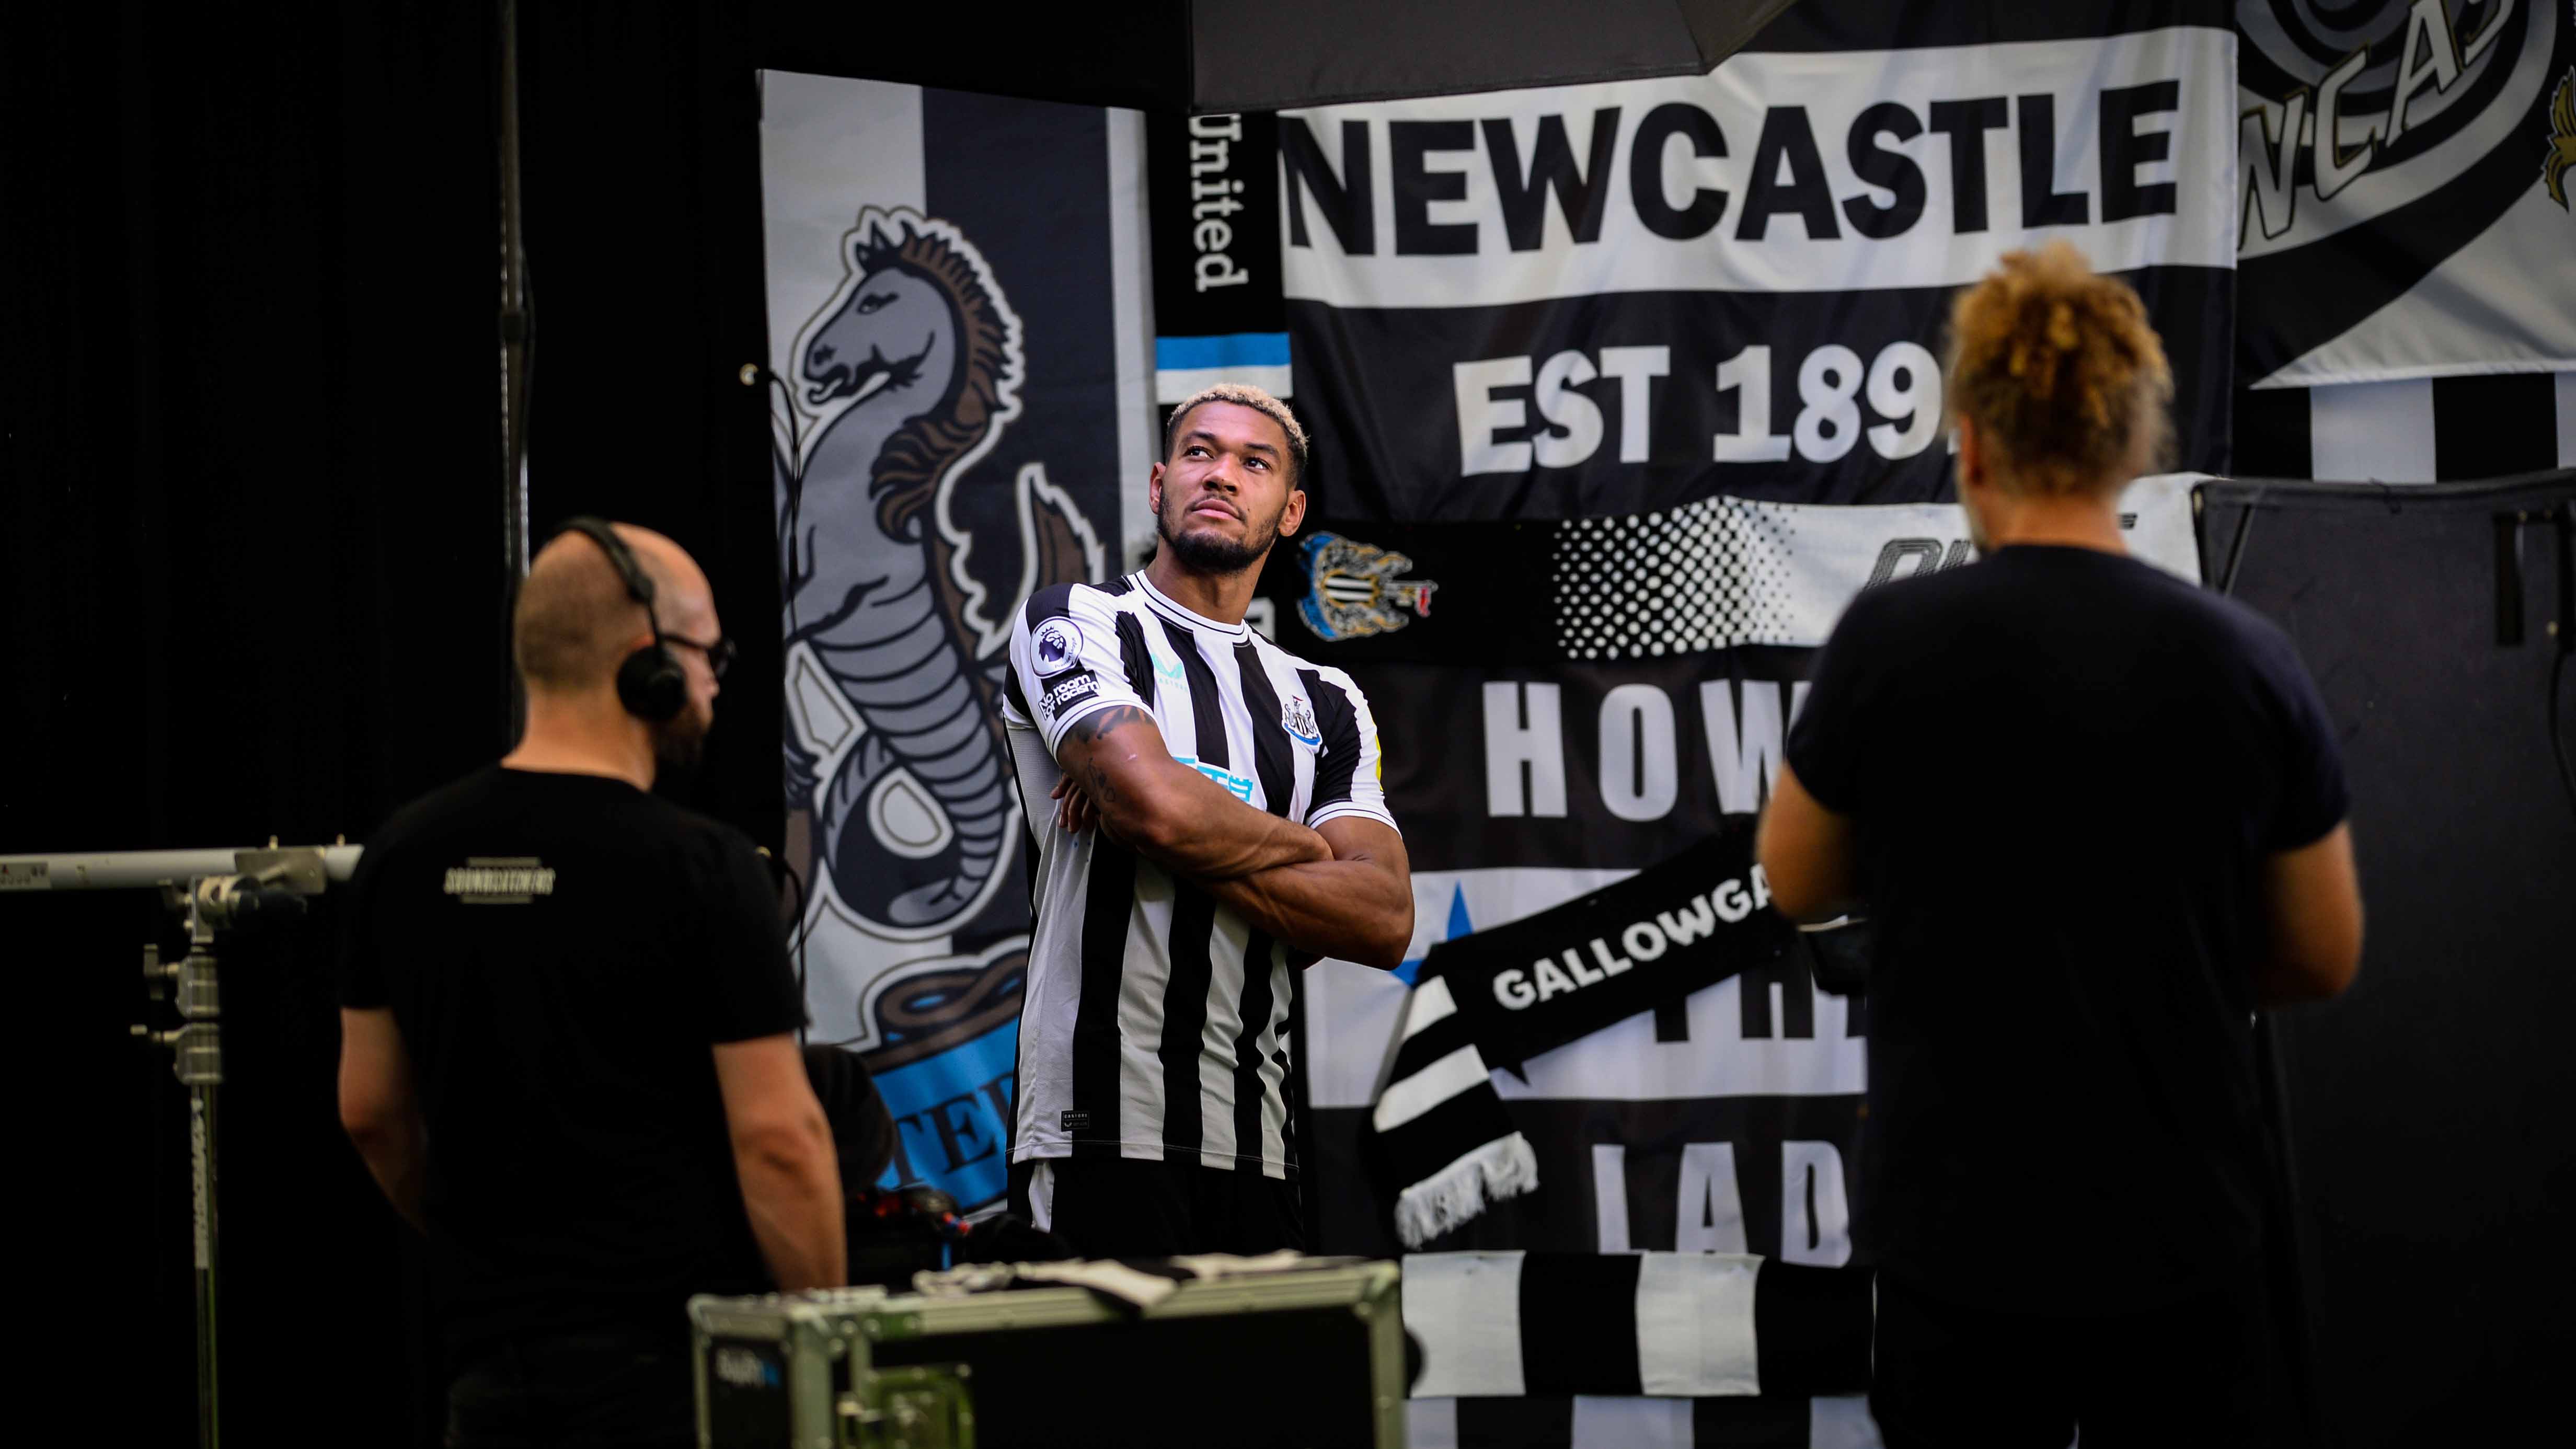 Behind the Scenes at Magpies' media access day